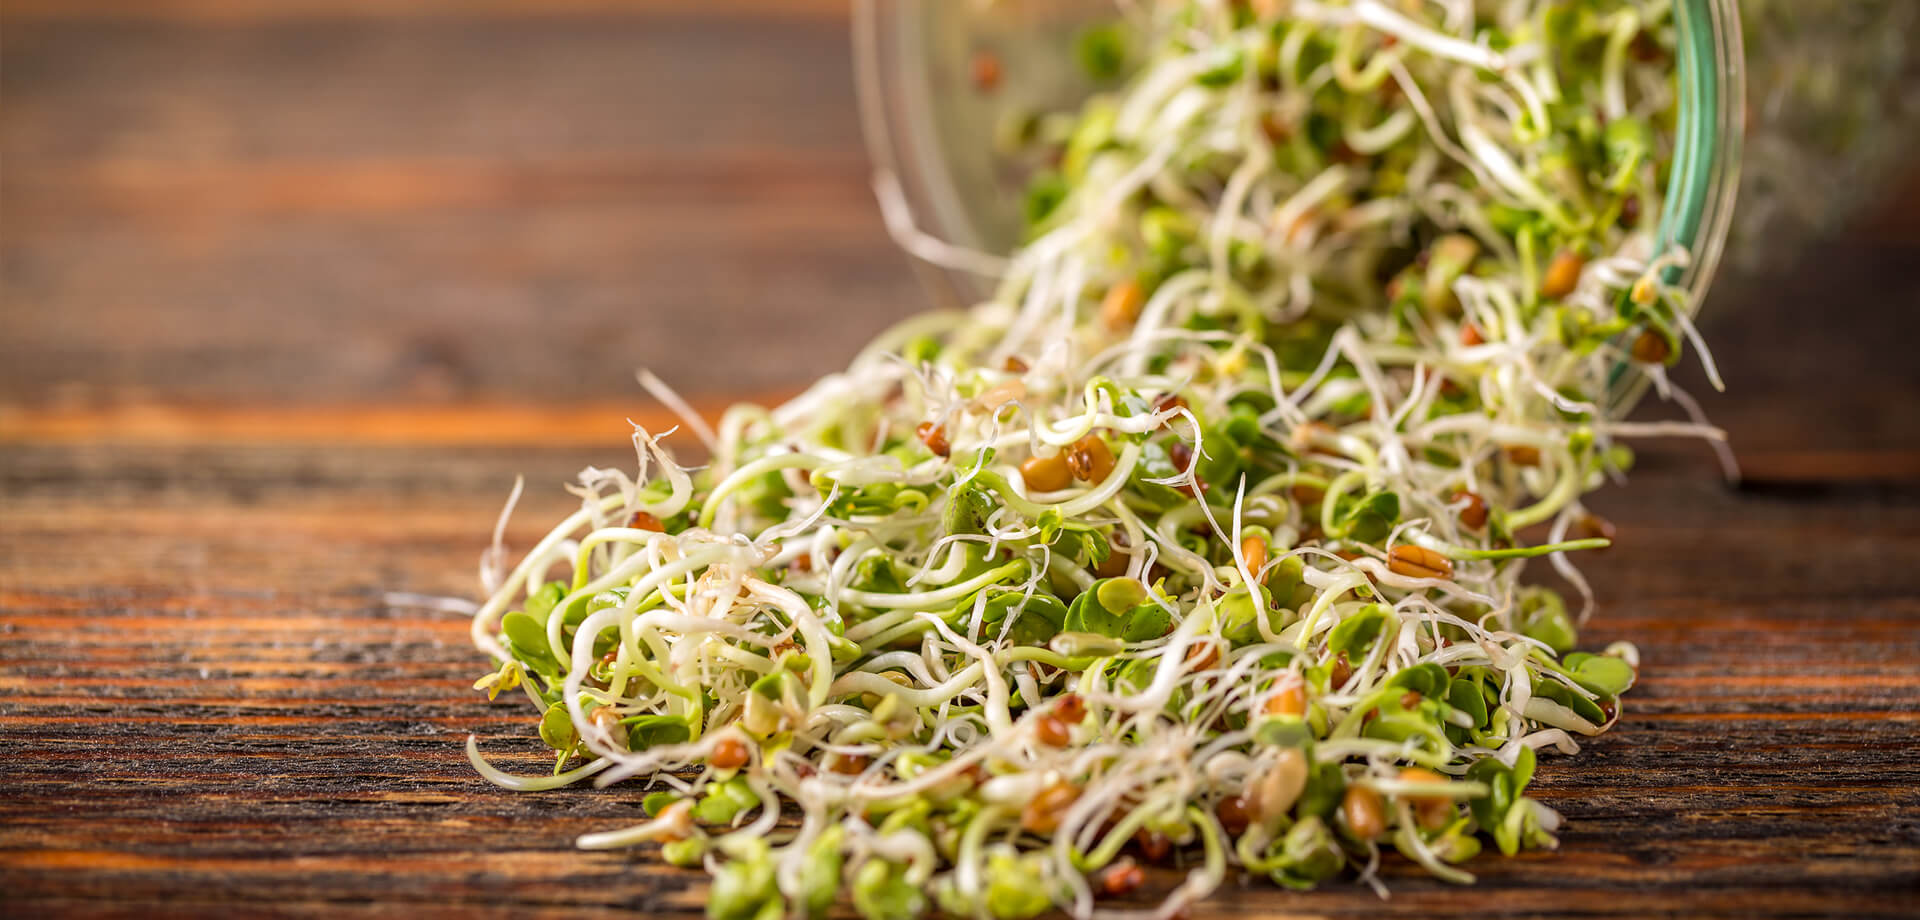 Sprouts for health